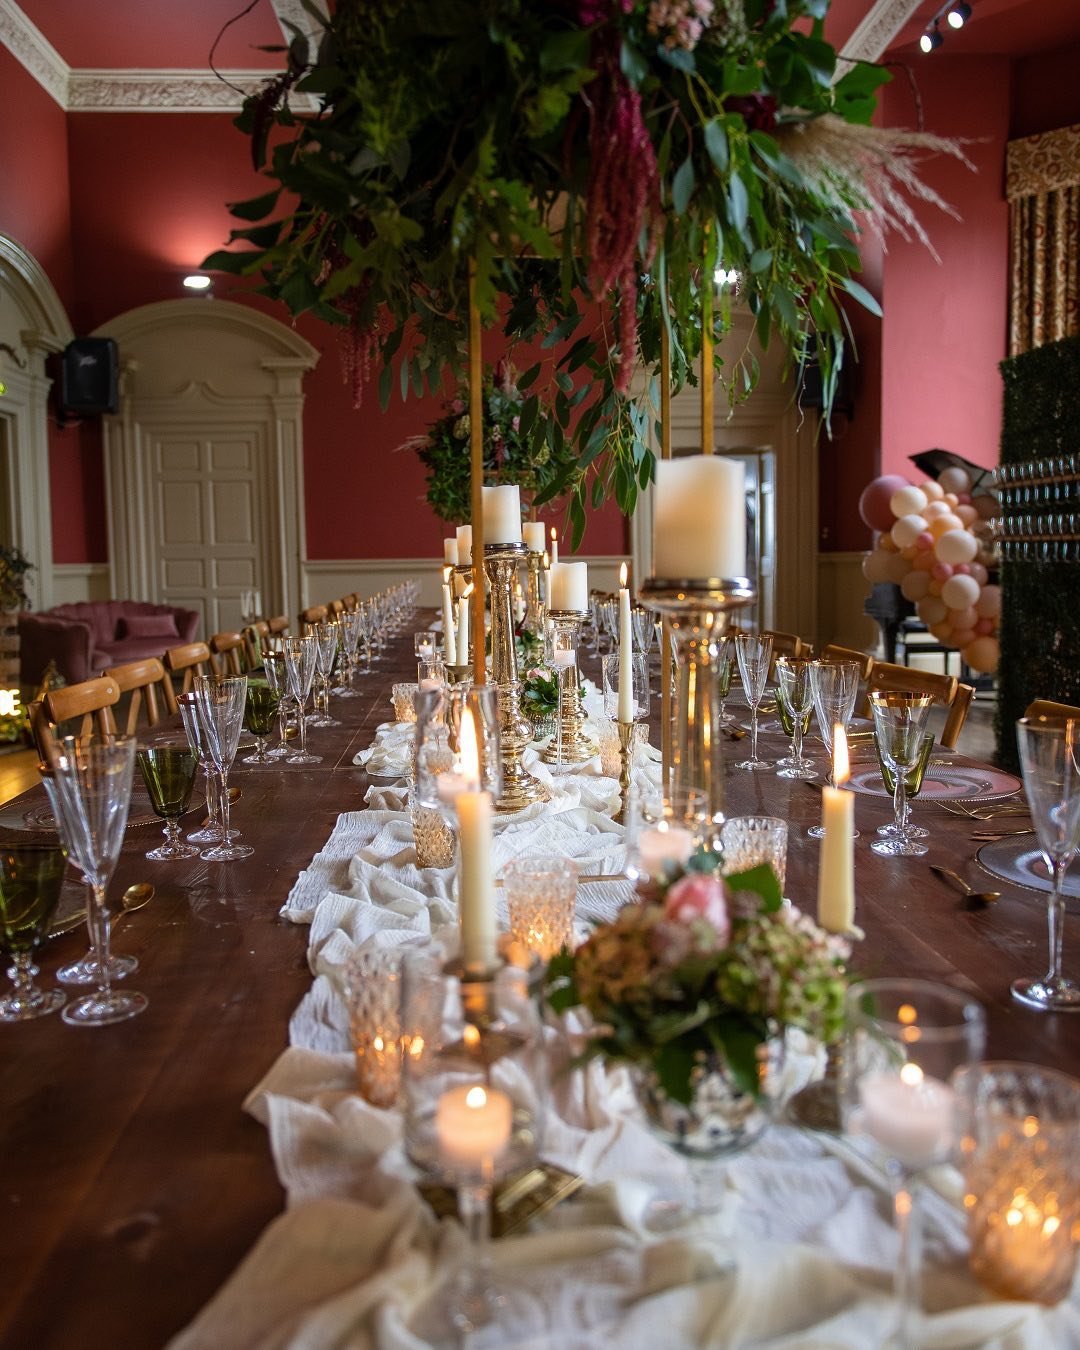 Delighted to have Slindon House featured in the December 2020/January 2021
edition of Your Sussex Wedding. Big shout out to all the amazing suppliers
who helped me showcase this lovely venue. Please head over to the link in my
Bio to see more. VENUE 